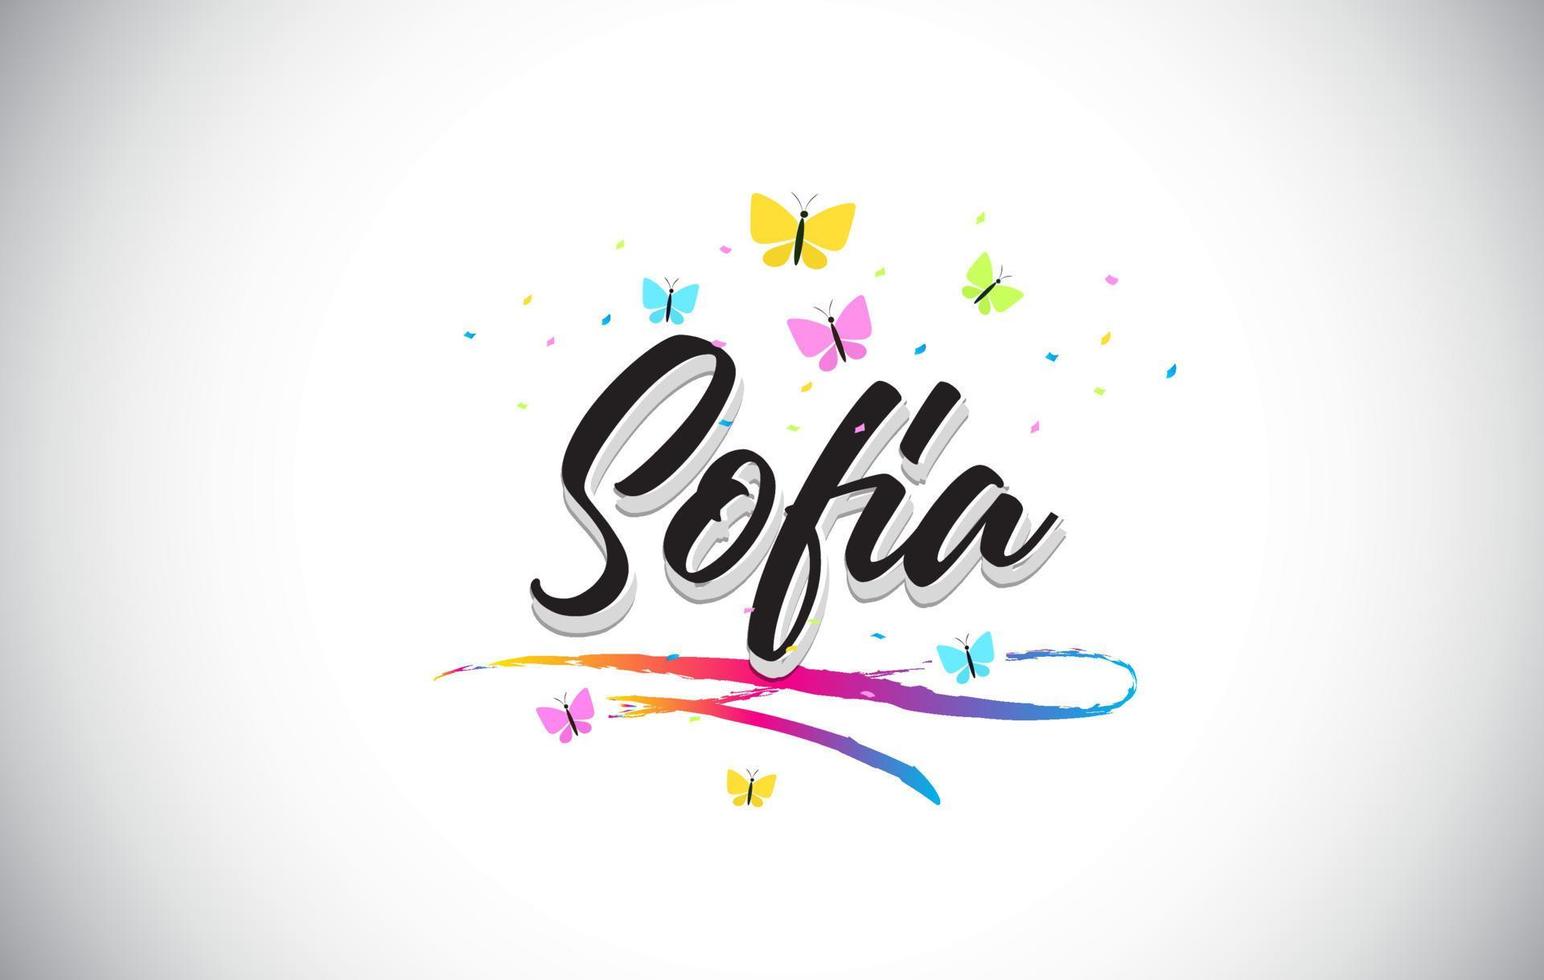 Sofia Handwritten Vector Word Text with Butterflies and Colorful Swoosh.